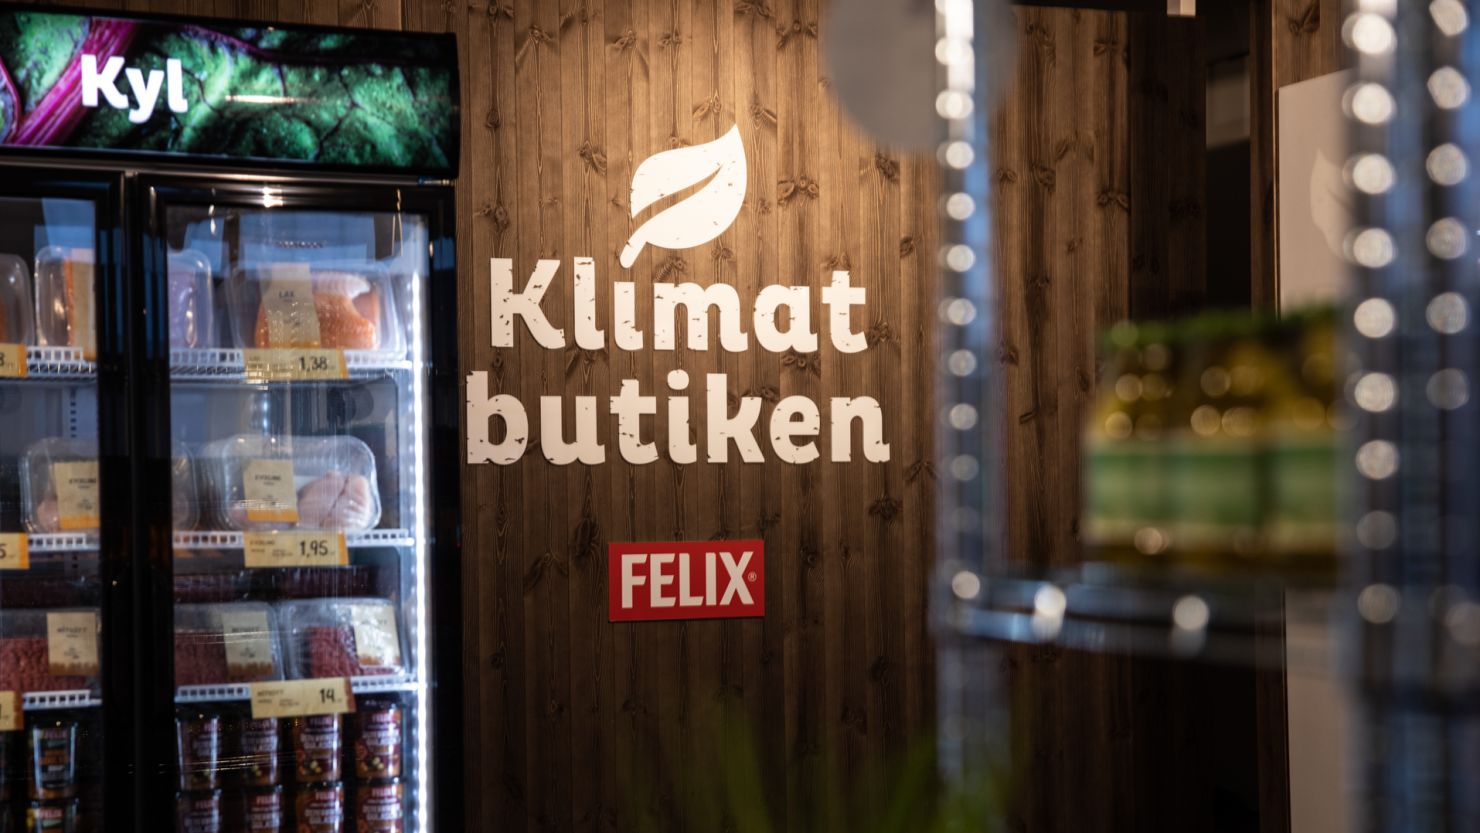 Swedish food brand Felix opened a pop-up shop where shoppers paid for goods based on their carbon emissions.